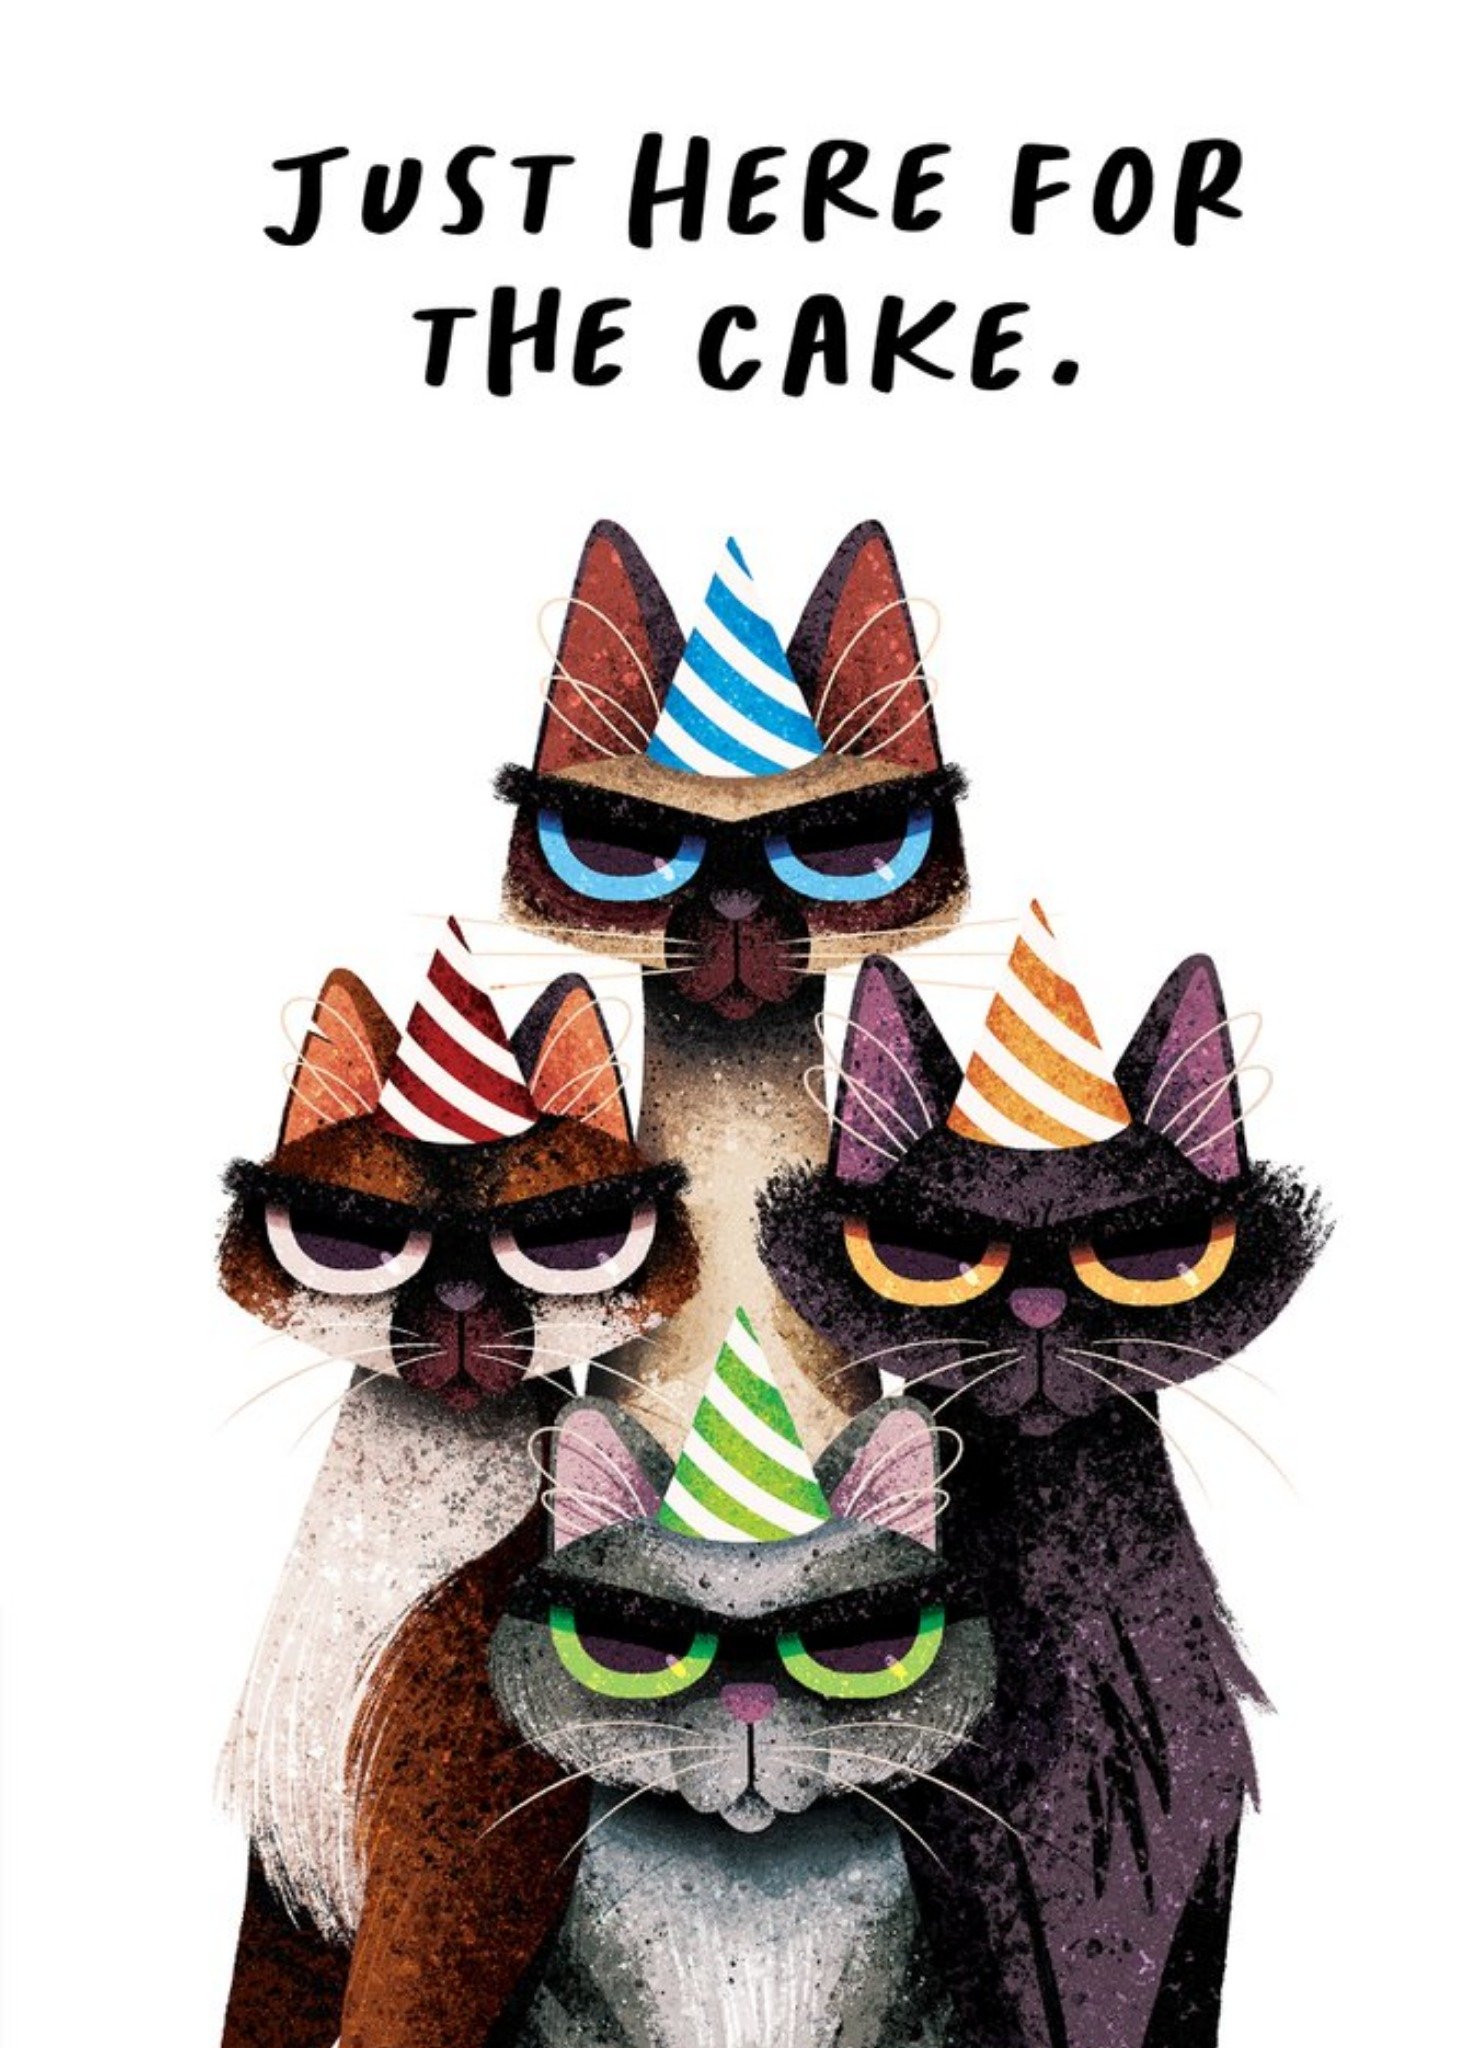 Moonpig Folio Illustration Of Four Cats Wearing Party Hats. Just Here For The Cake Birthday Card, La